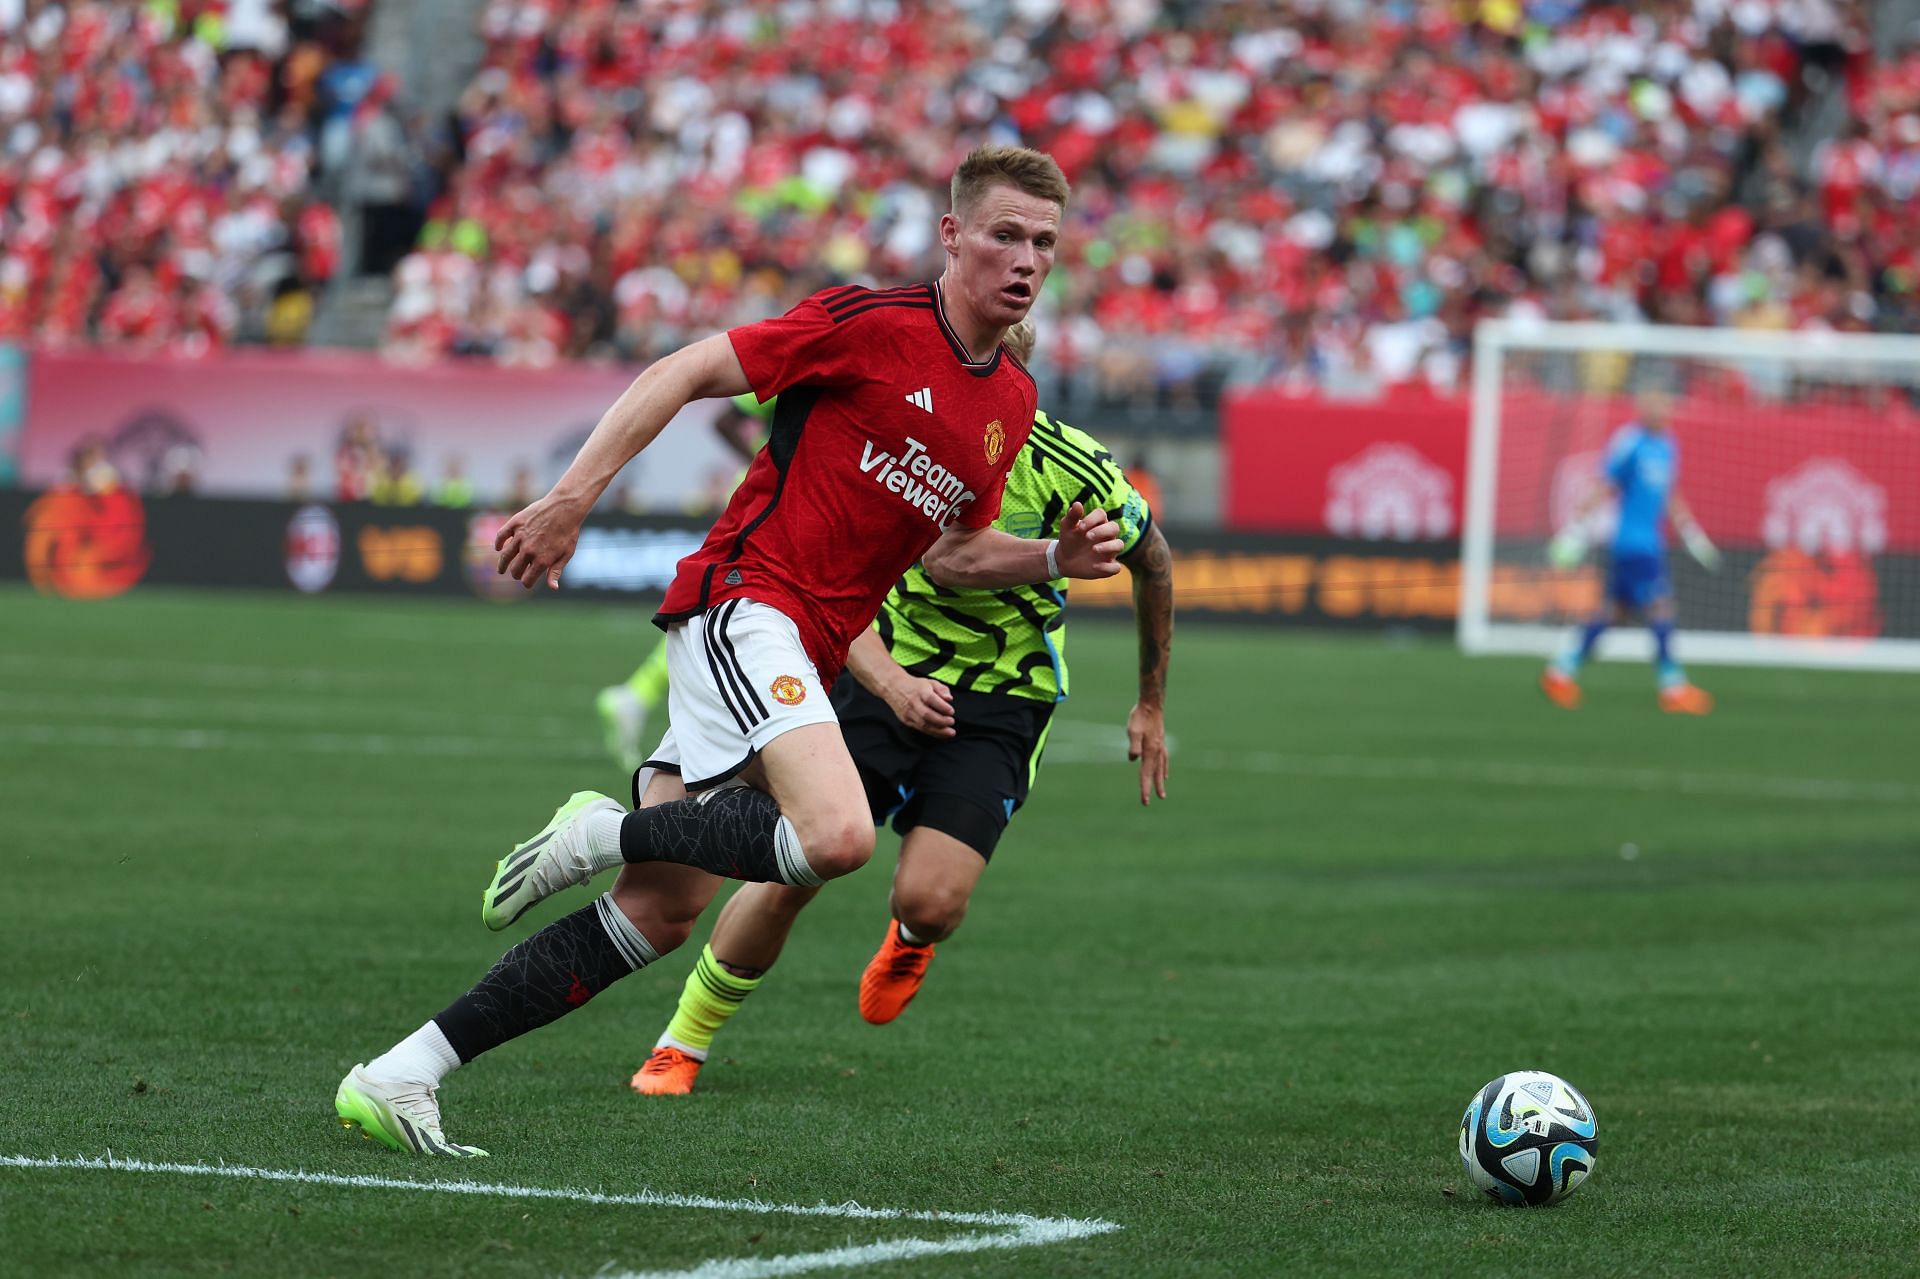 McTominay is expected to stay.